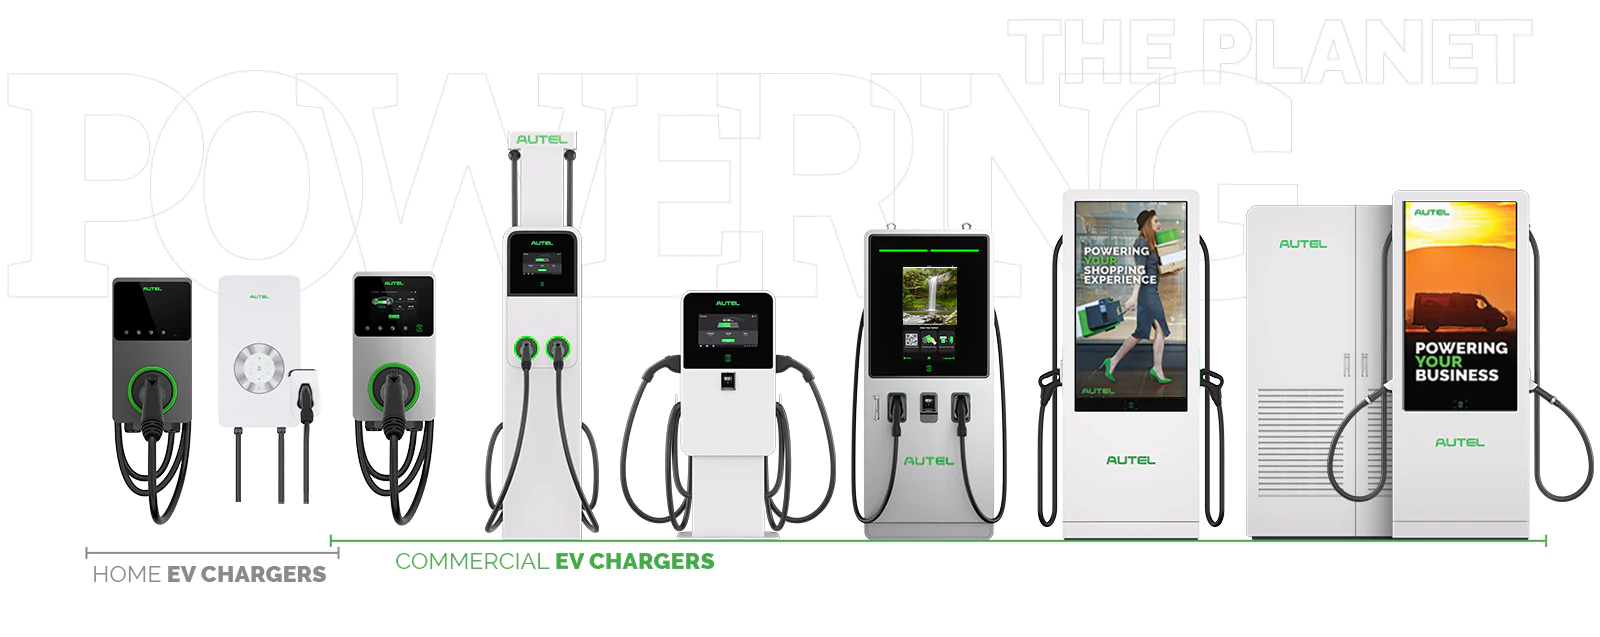 Autel's full product line of EV chargers